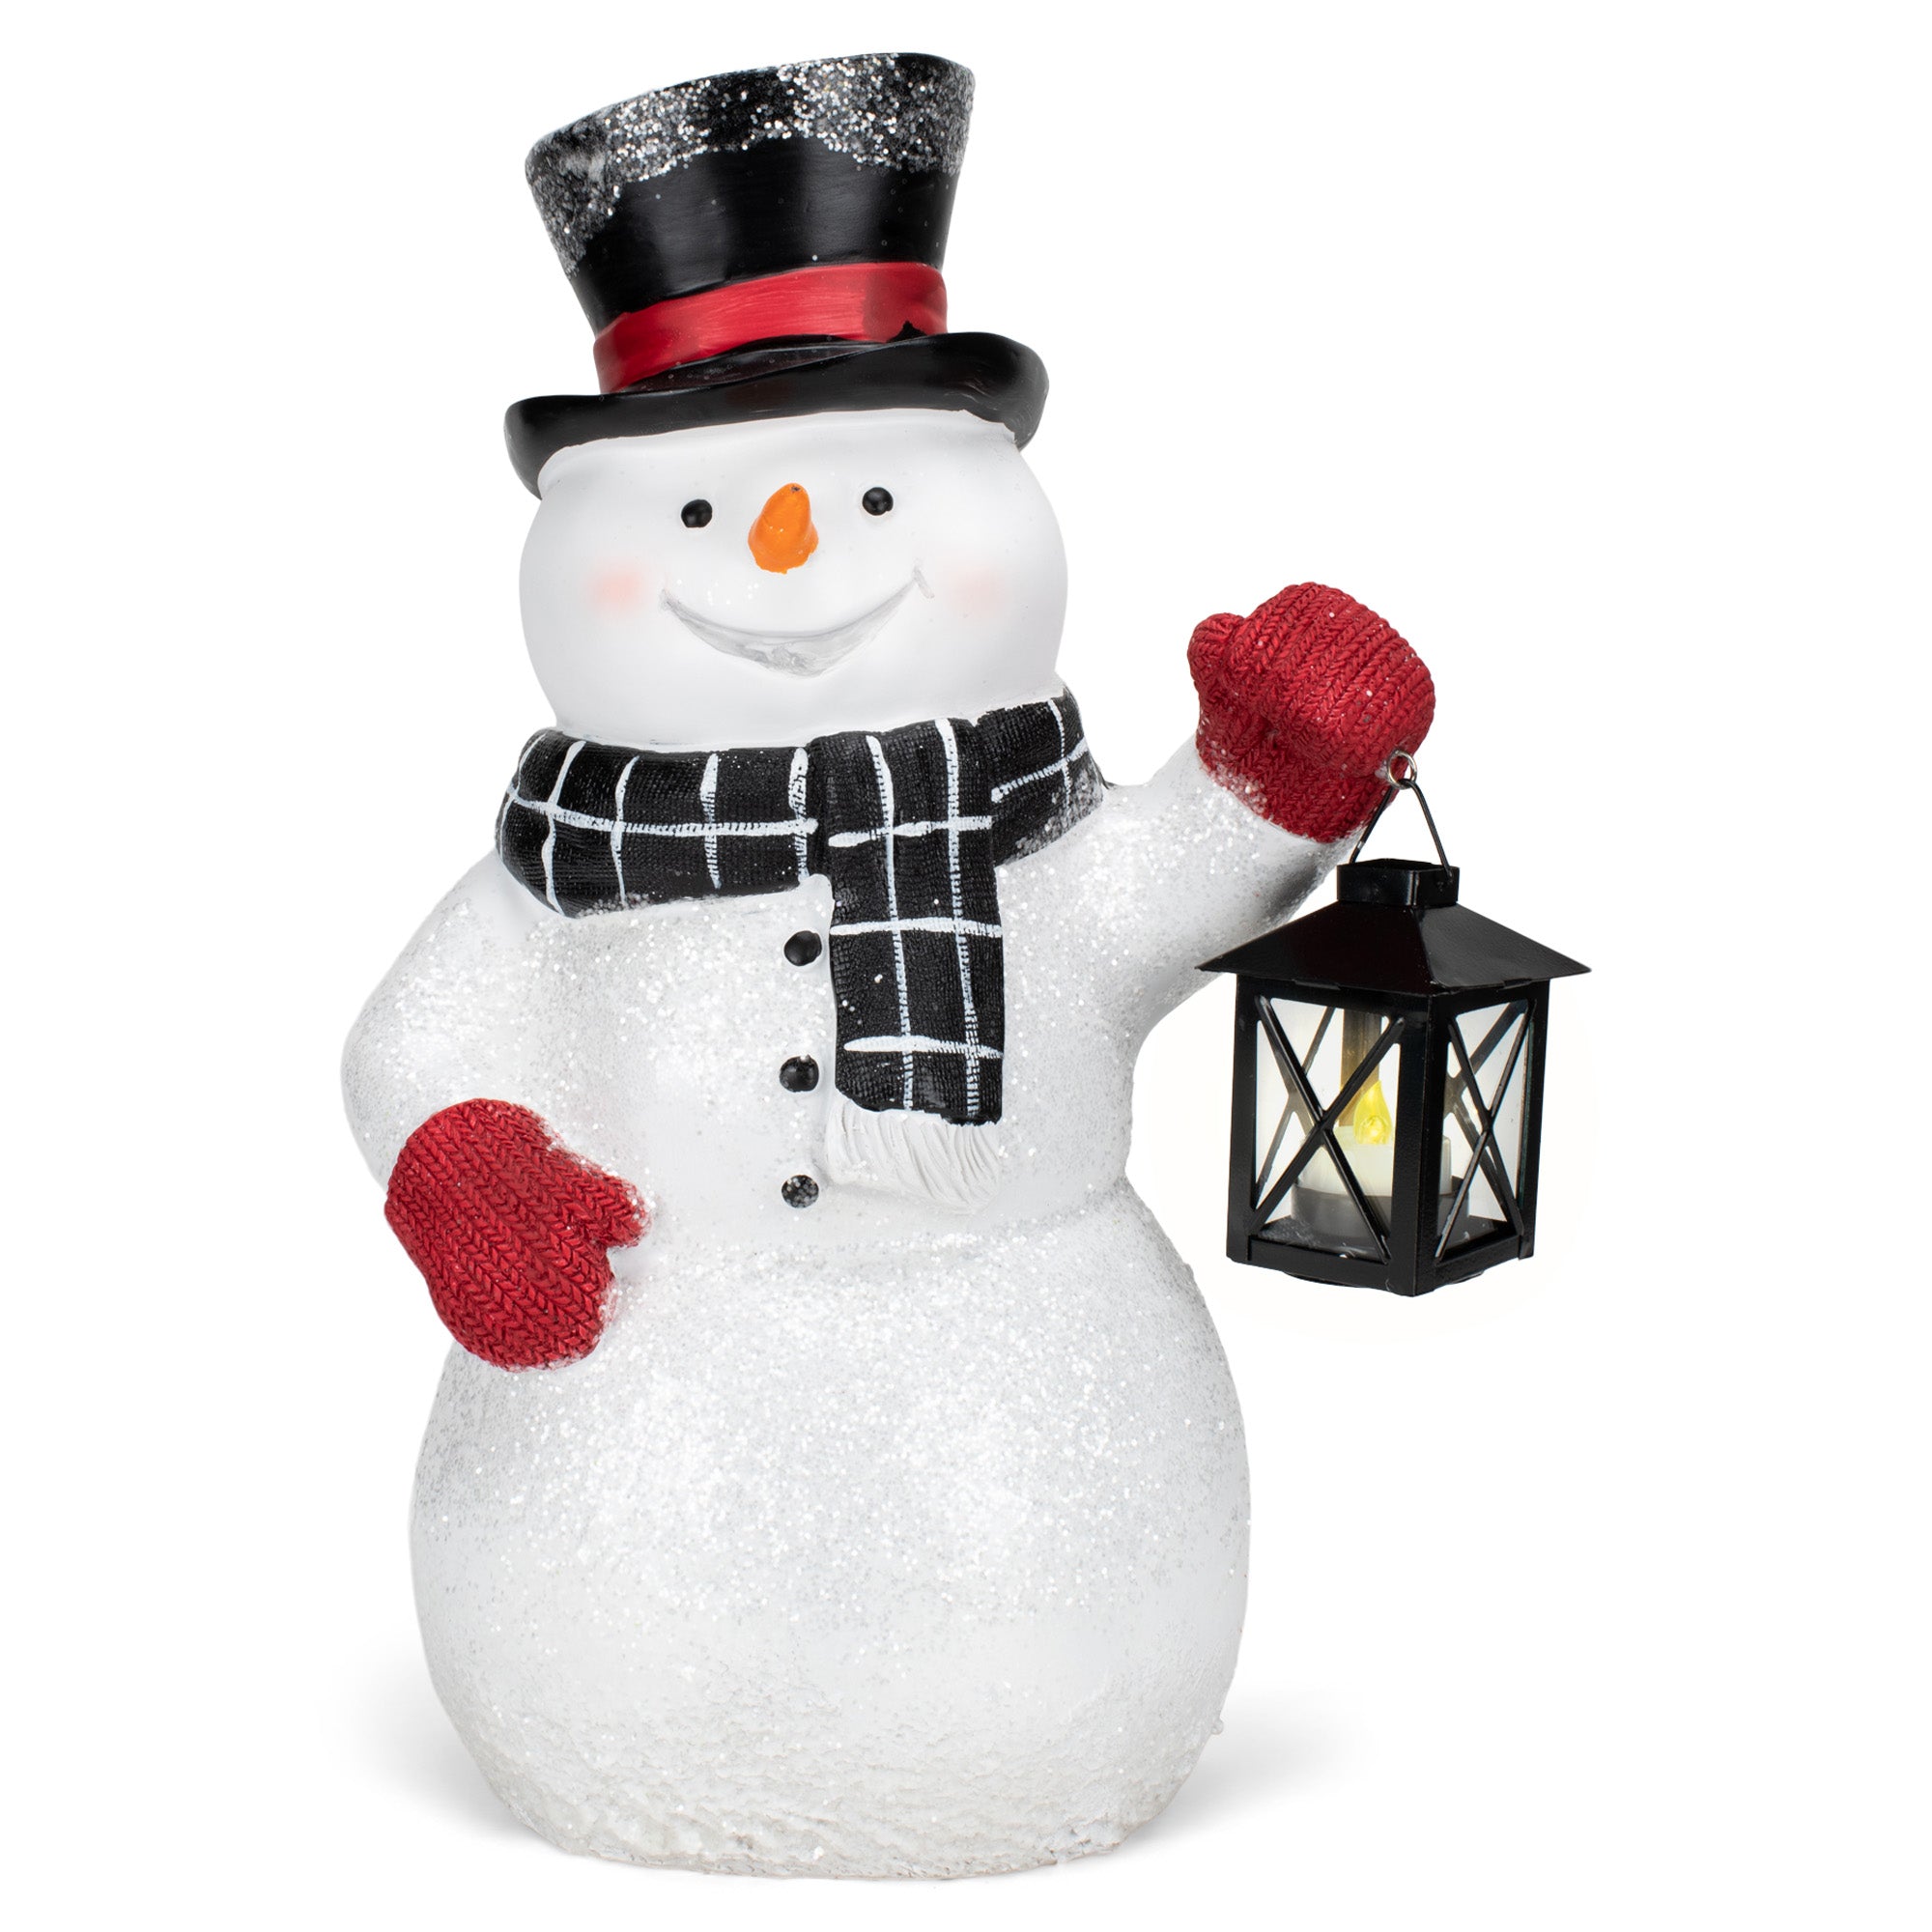 Feltree Christmas Clearance Decorations Snowman with 40 White LED Light 16x24inches Life Size Foldable Table Top Christmas Clearance Blow Mold Indoor